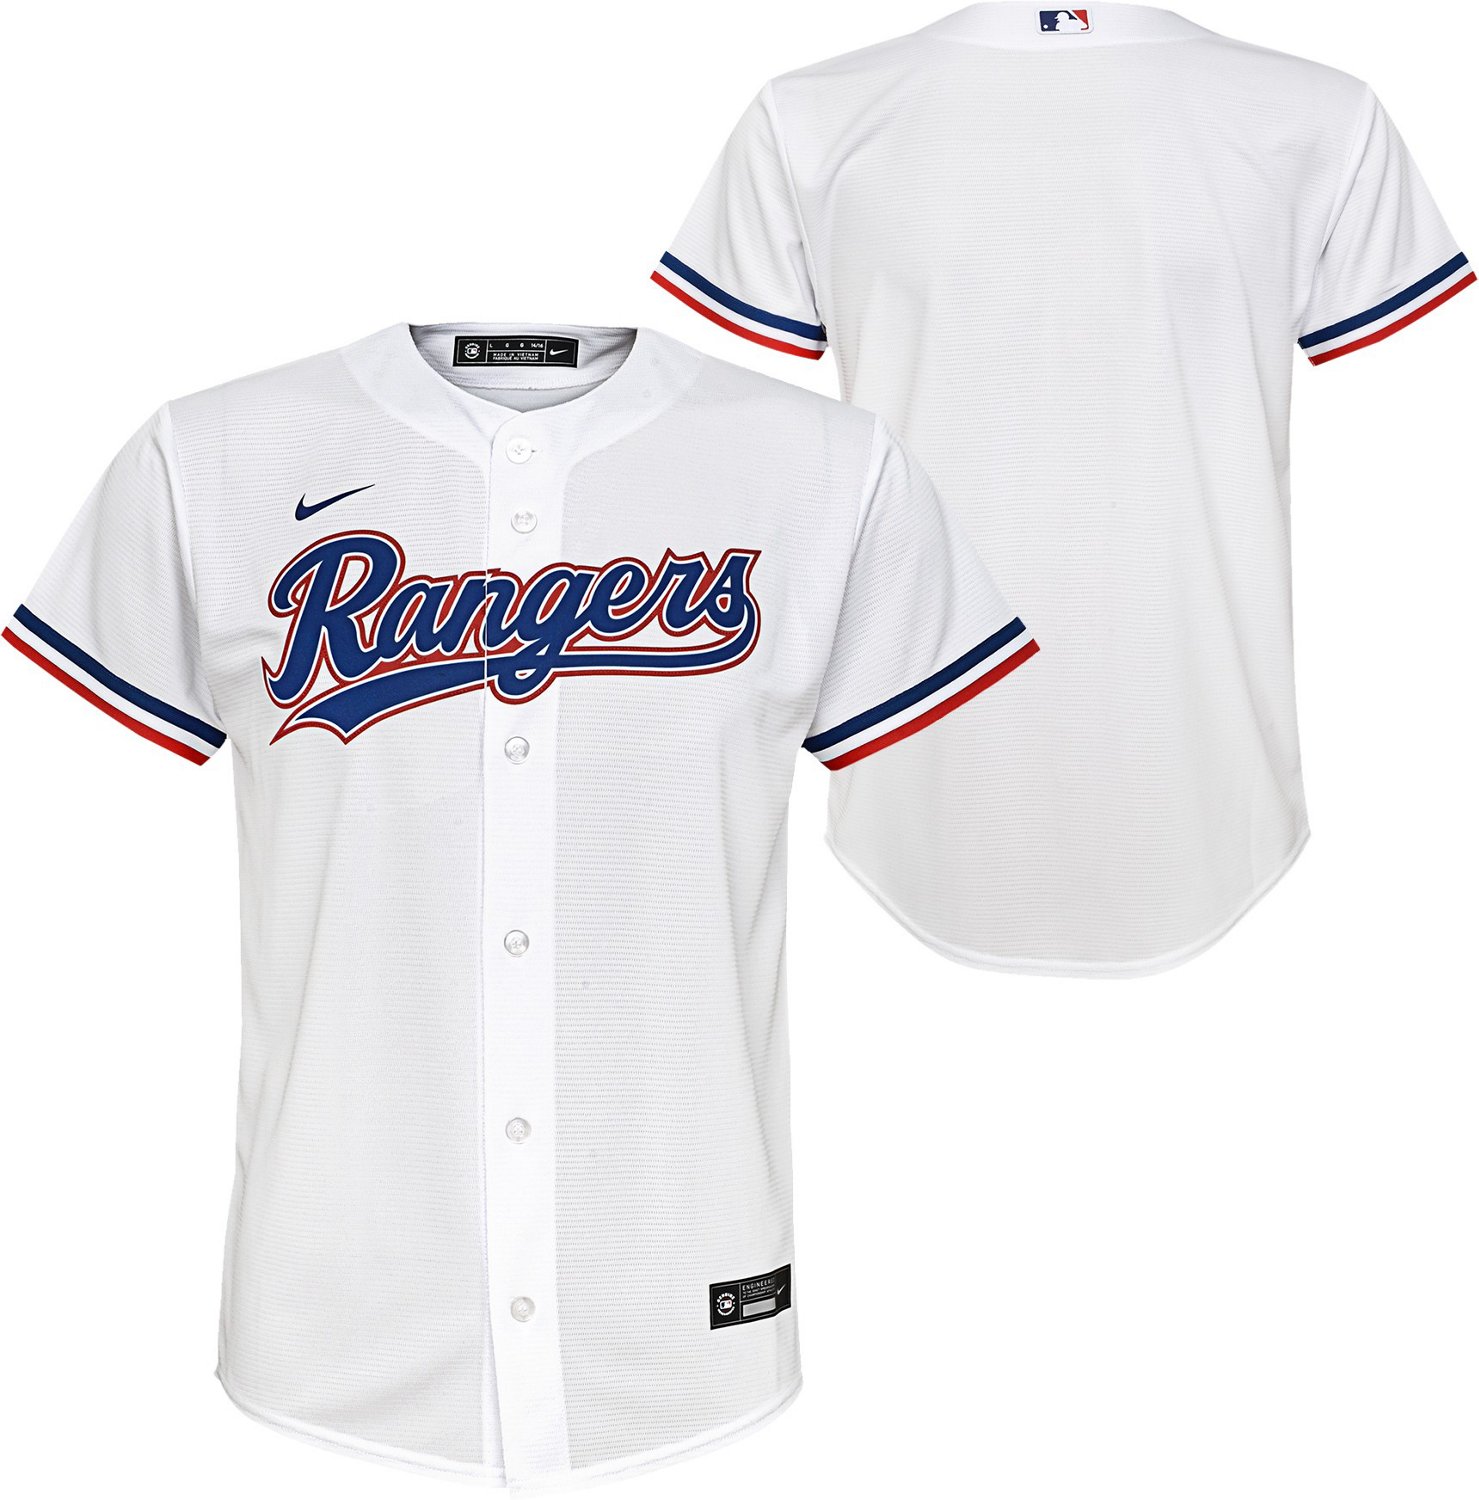 Nike Youth Texas Rangers Home Replica Jersey Academy